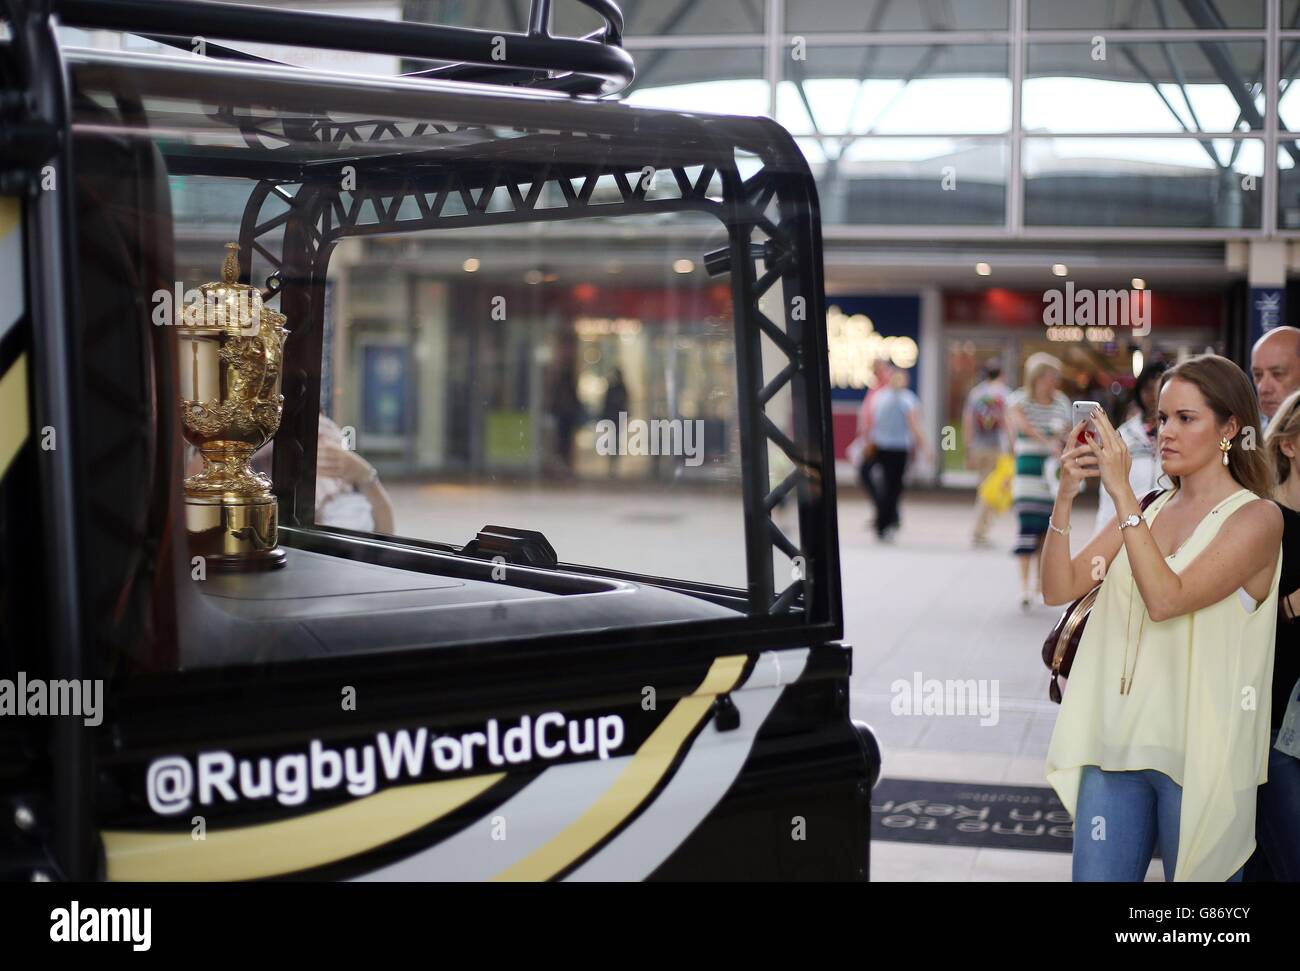 The Webb Ellis Cup at intu Milton Keynes as part of the 100 day Rugby World Cup Trophy Tour of the UK & Ireland. Stock Photo